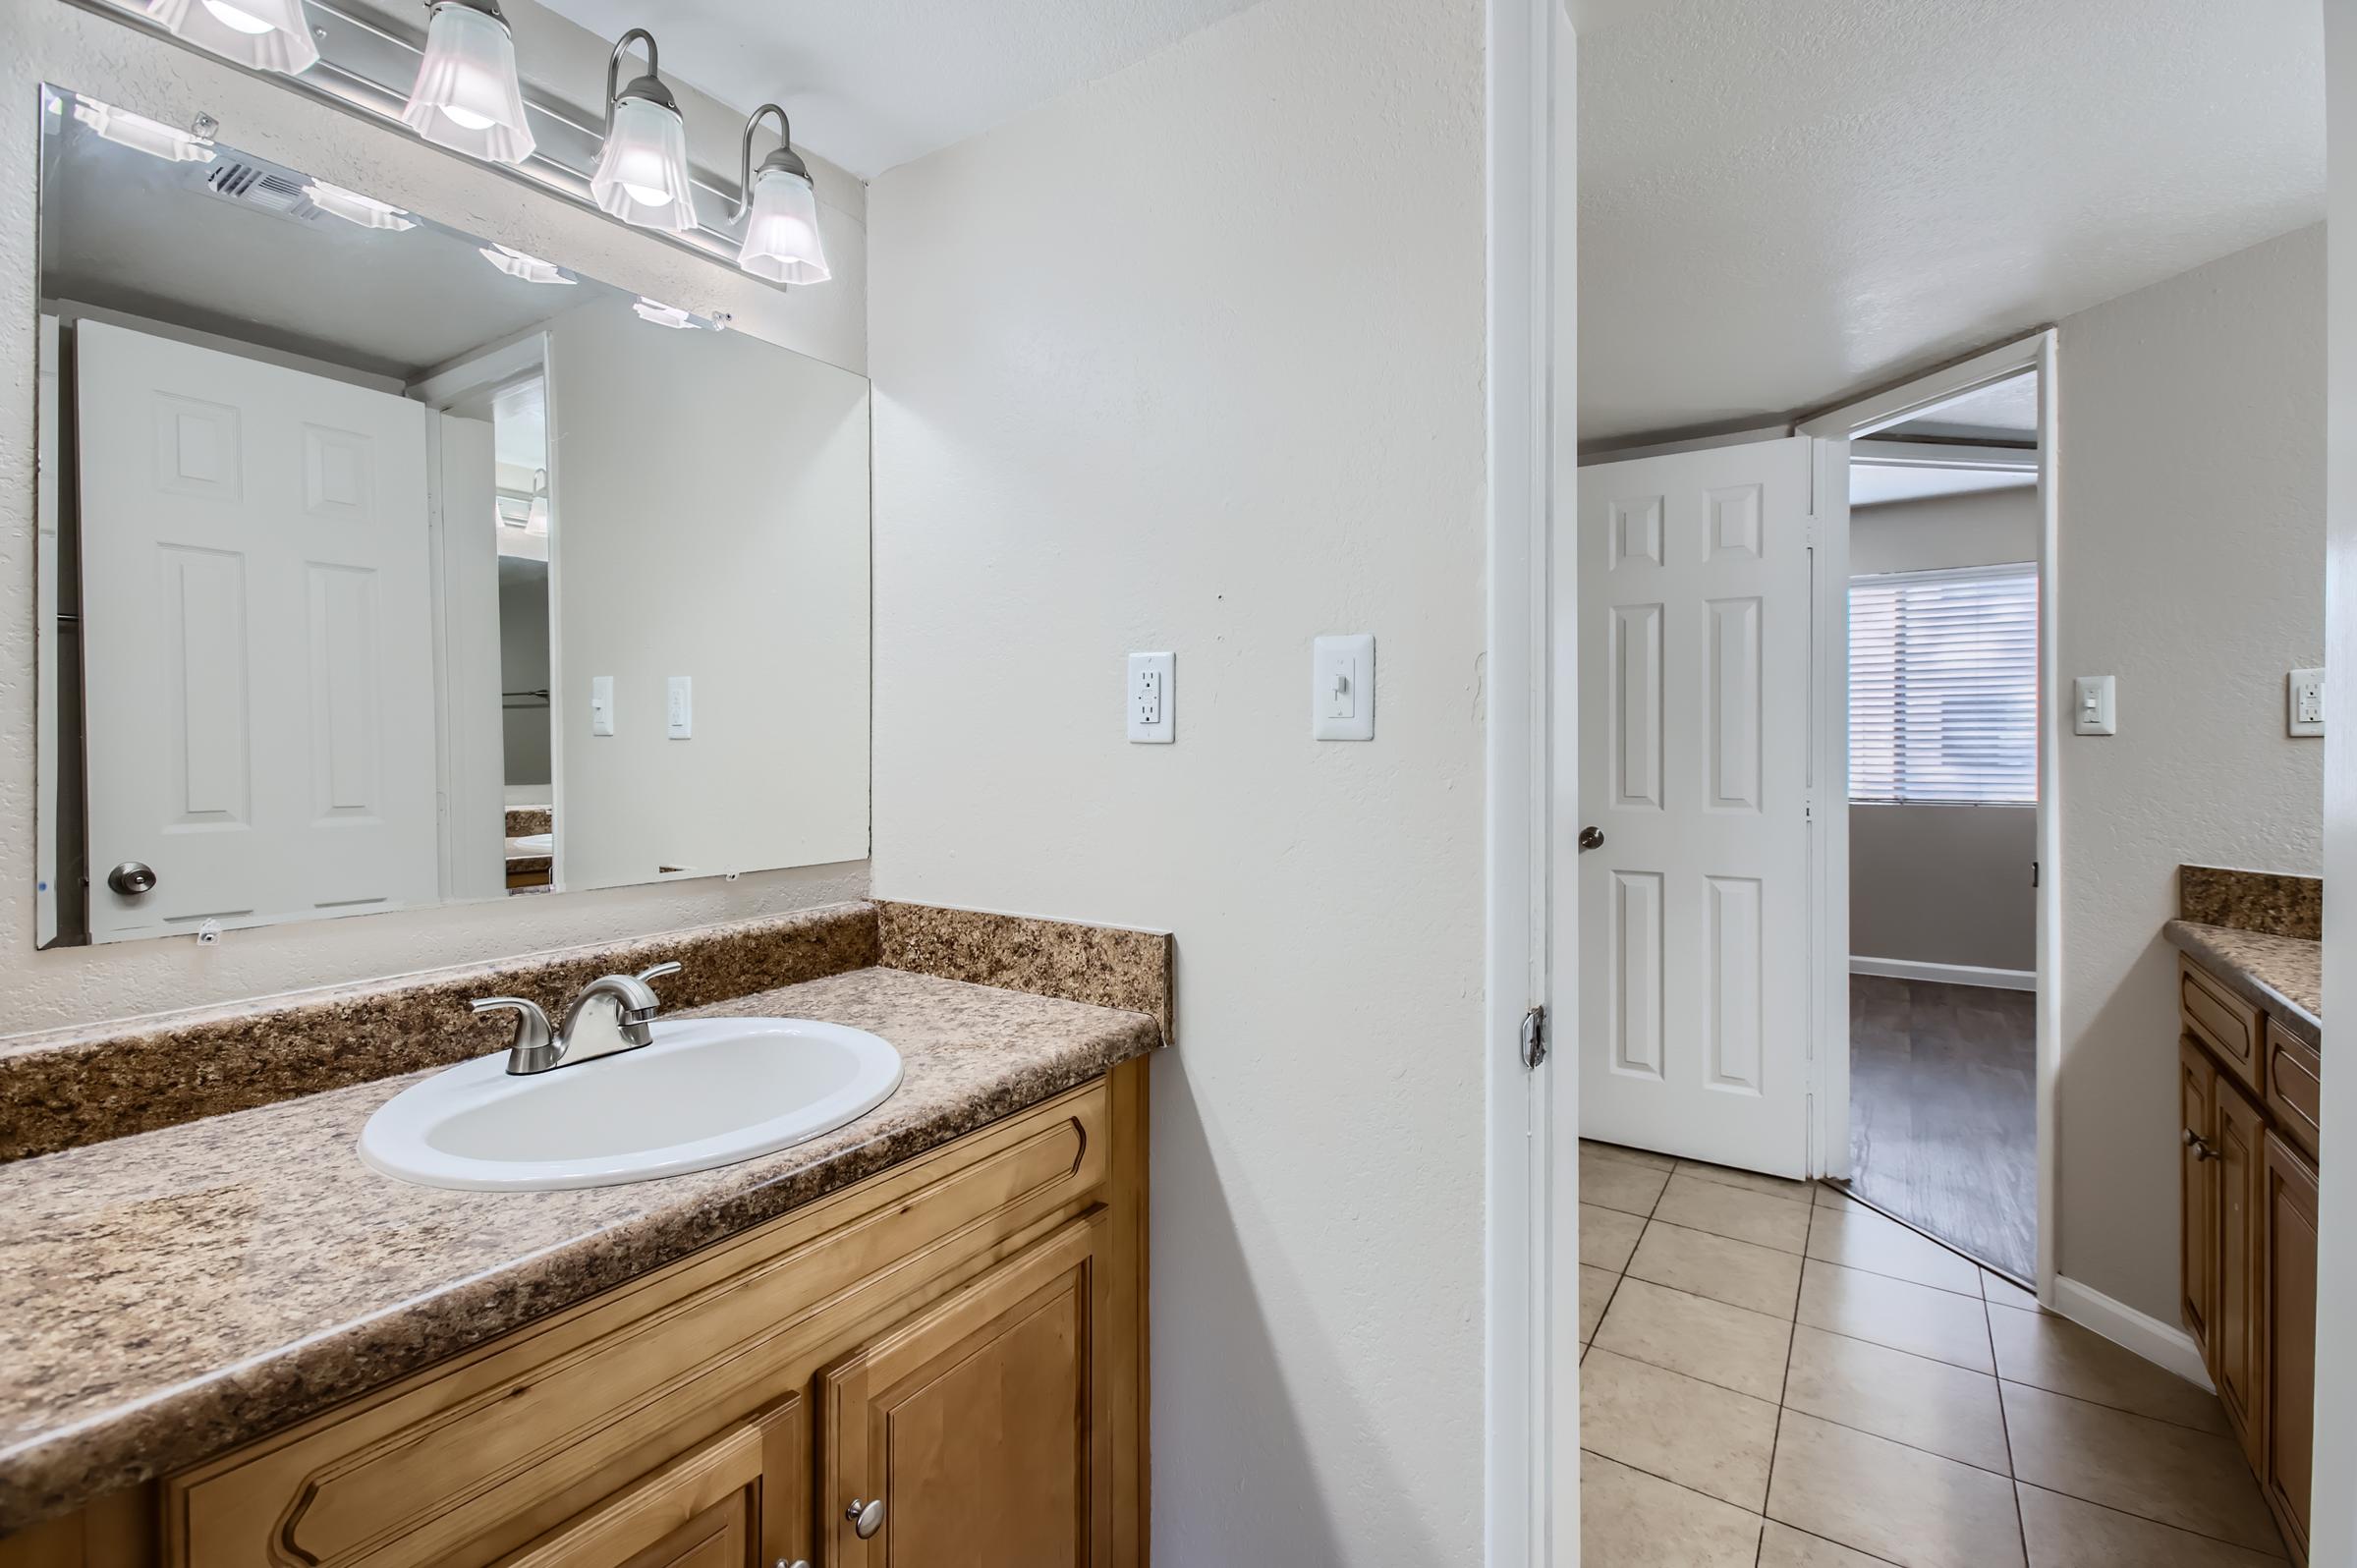 Rise Desert Cove apartment bathroom with a sink and mirror on the left and a view into another room in the front